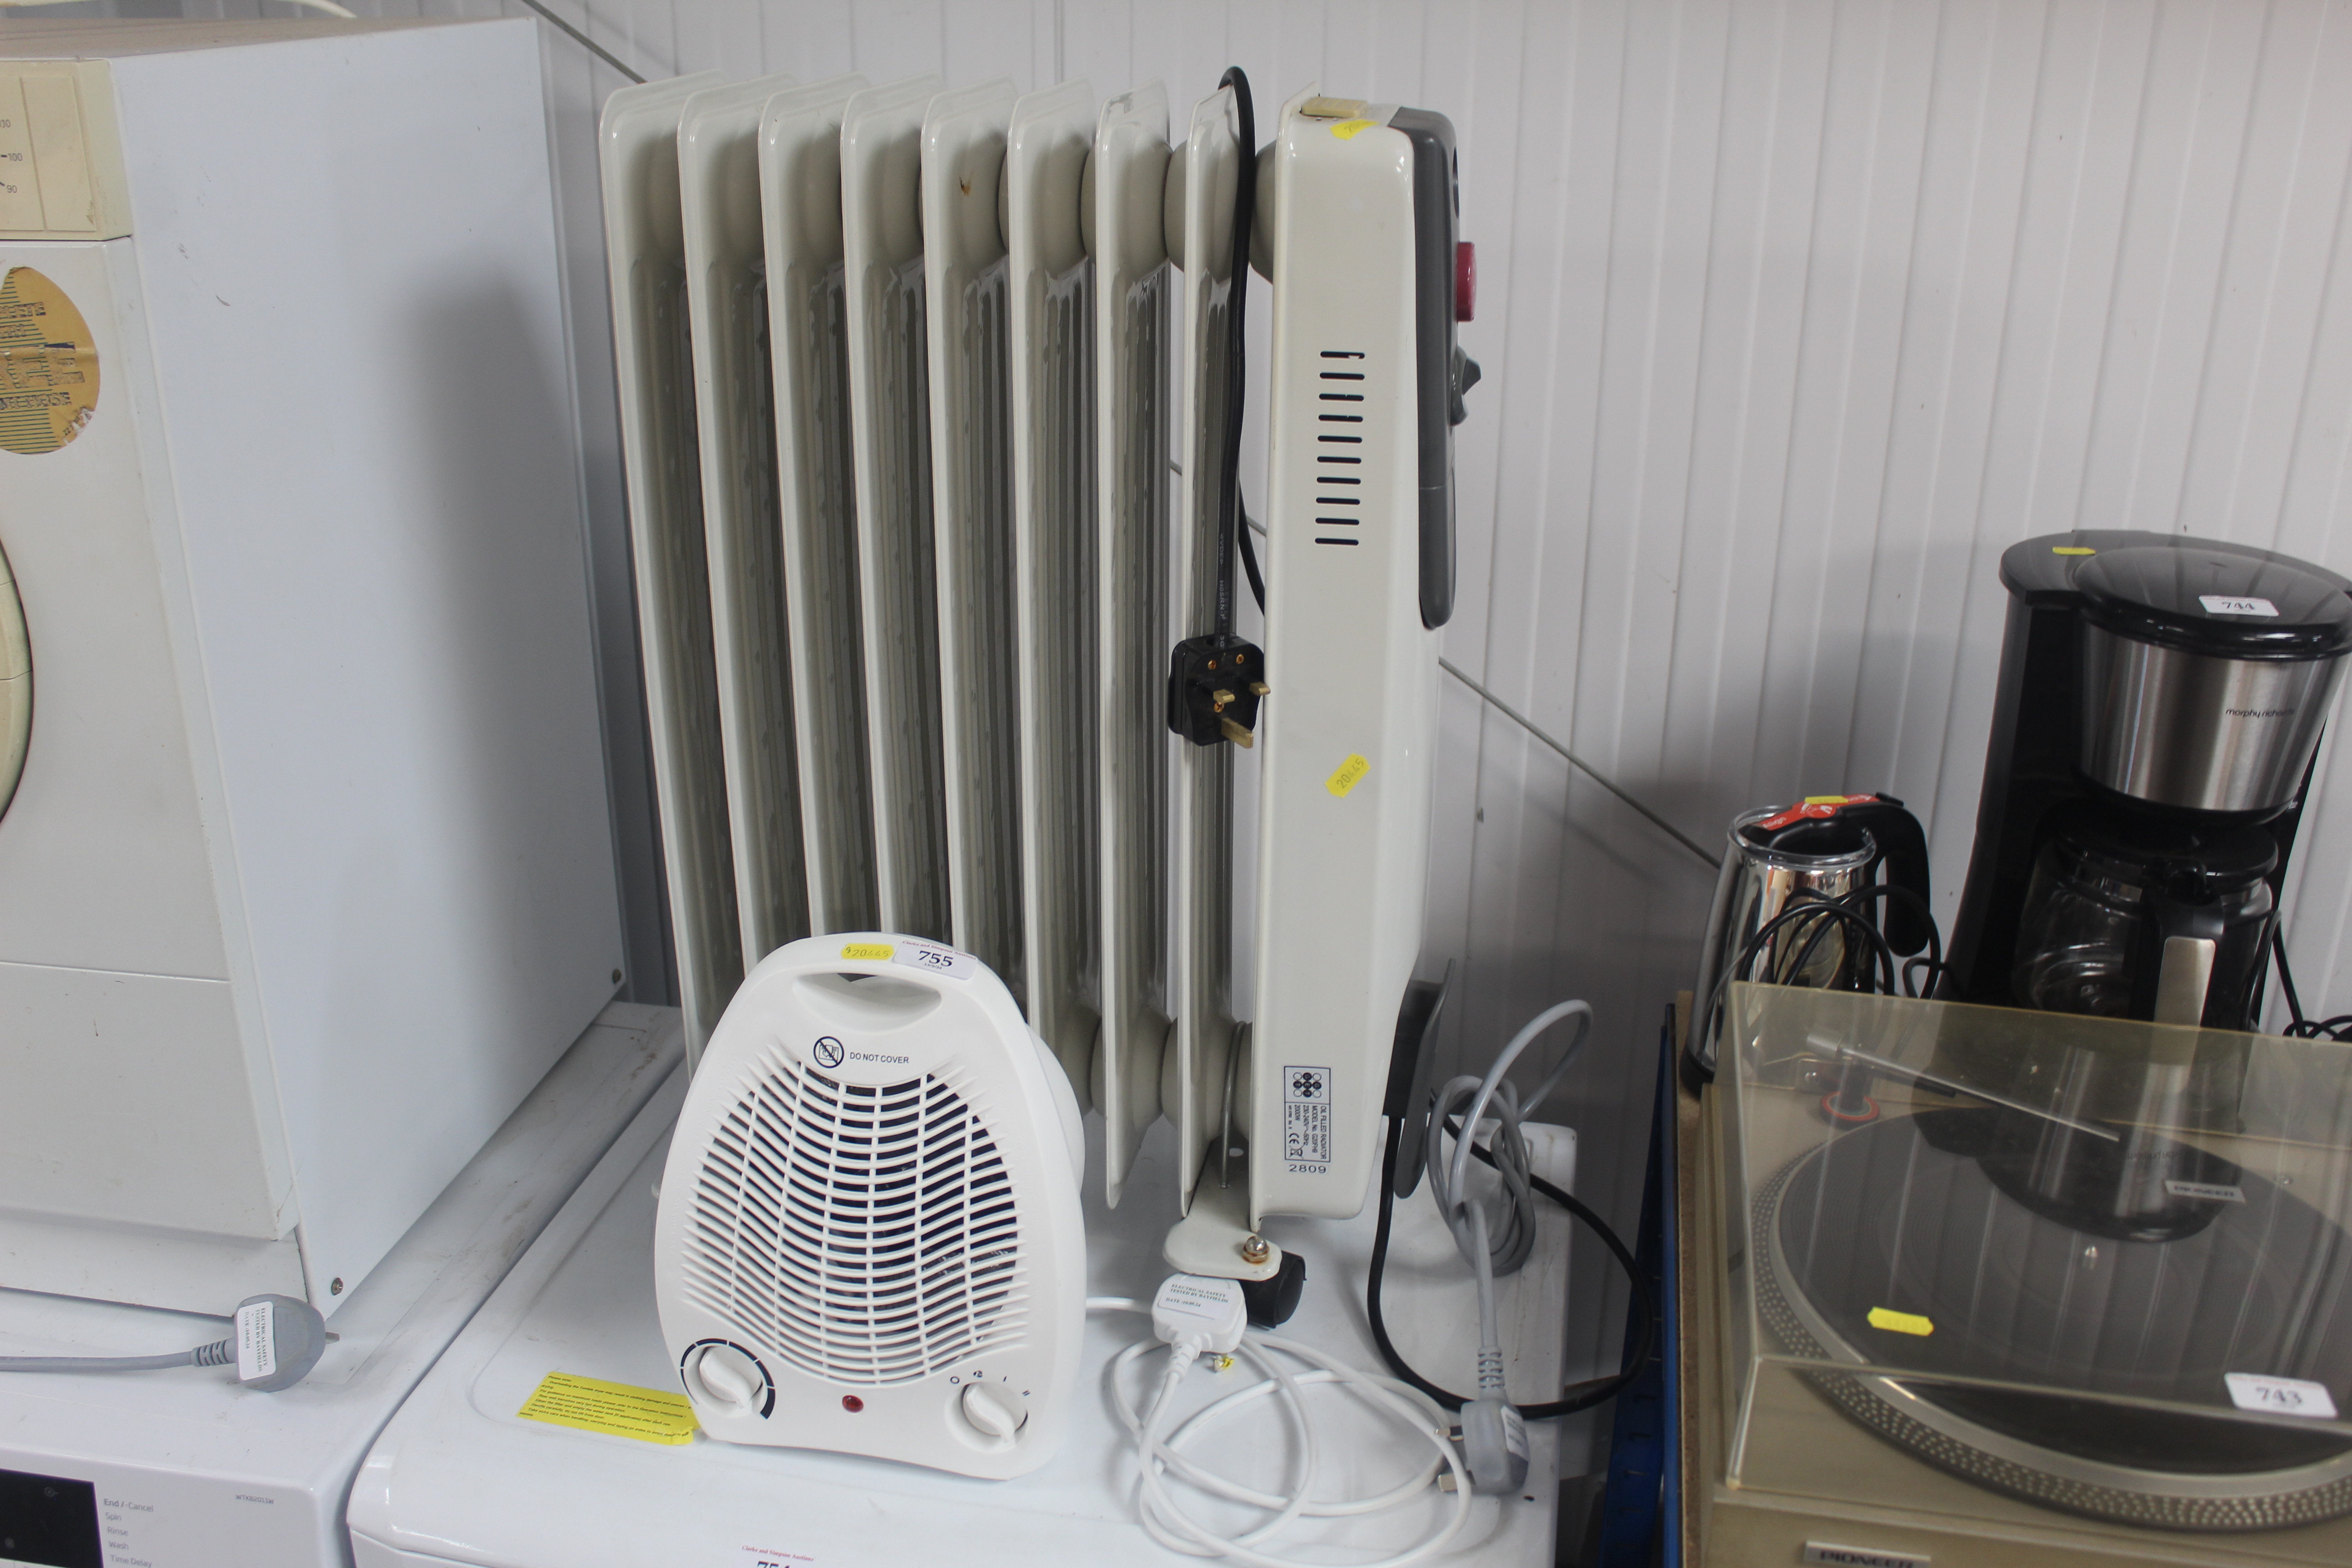 An electric oil filled radiator and fan heater